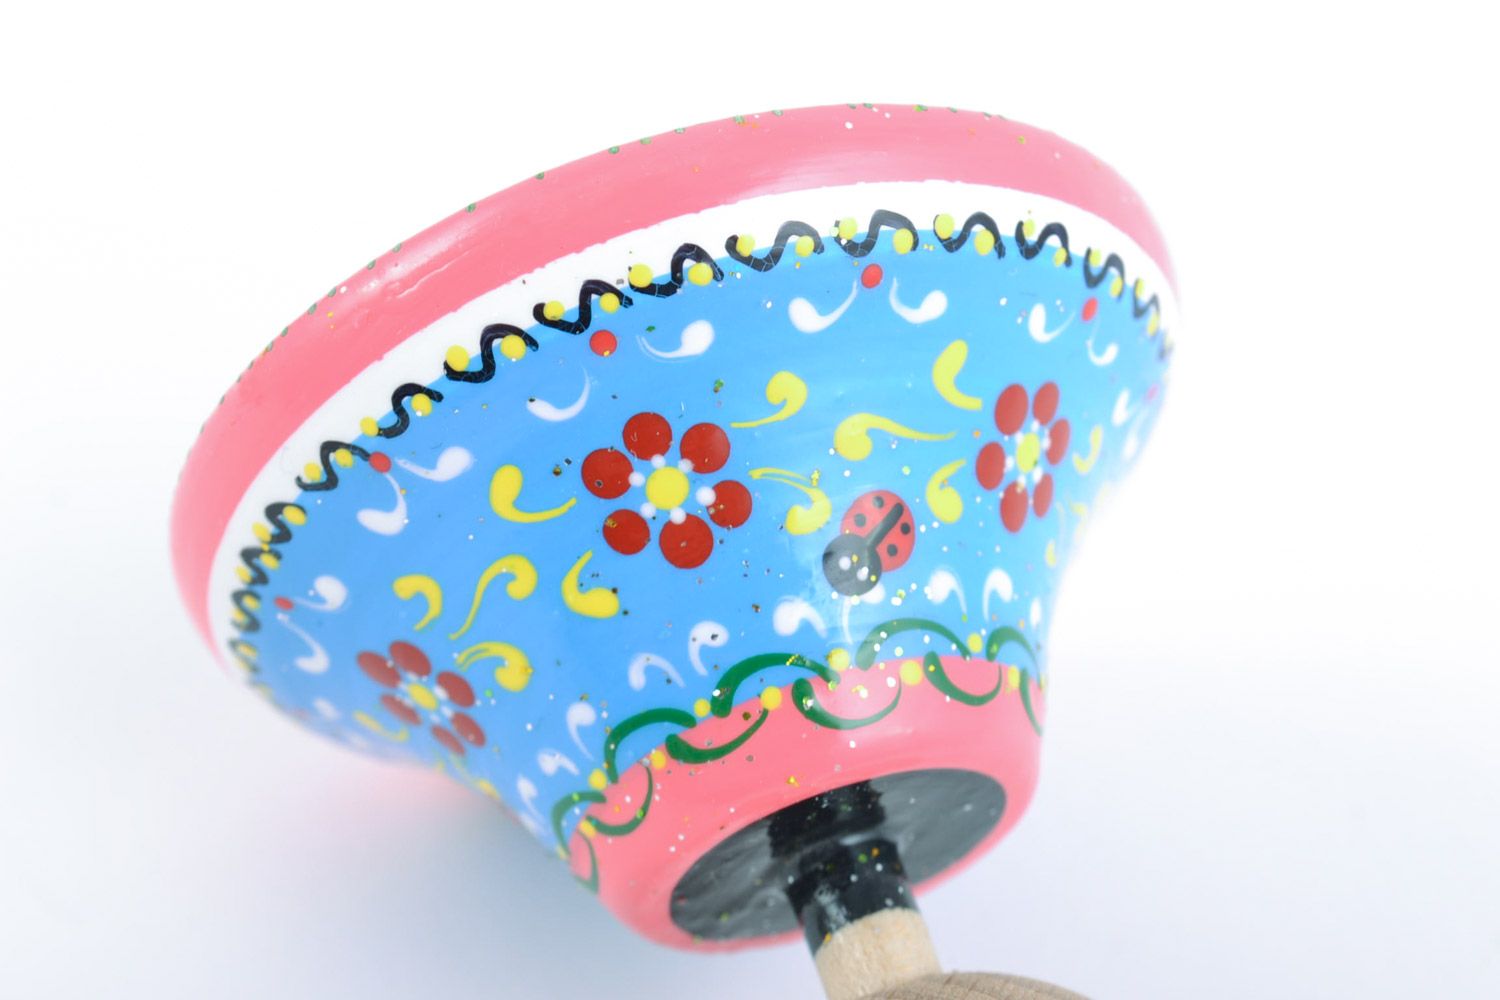 Homemade wooden eco friendly toy spinning top painted in blue and pink colors photo 4